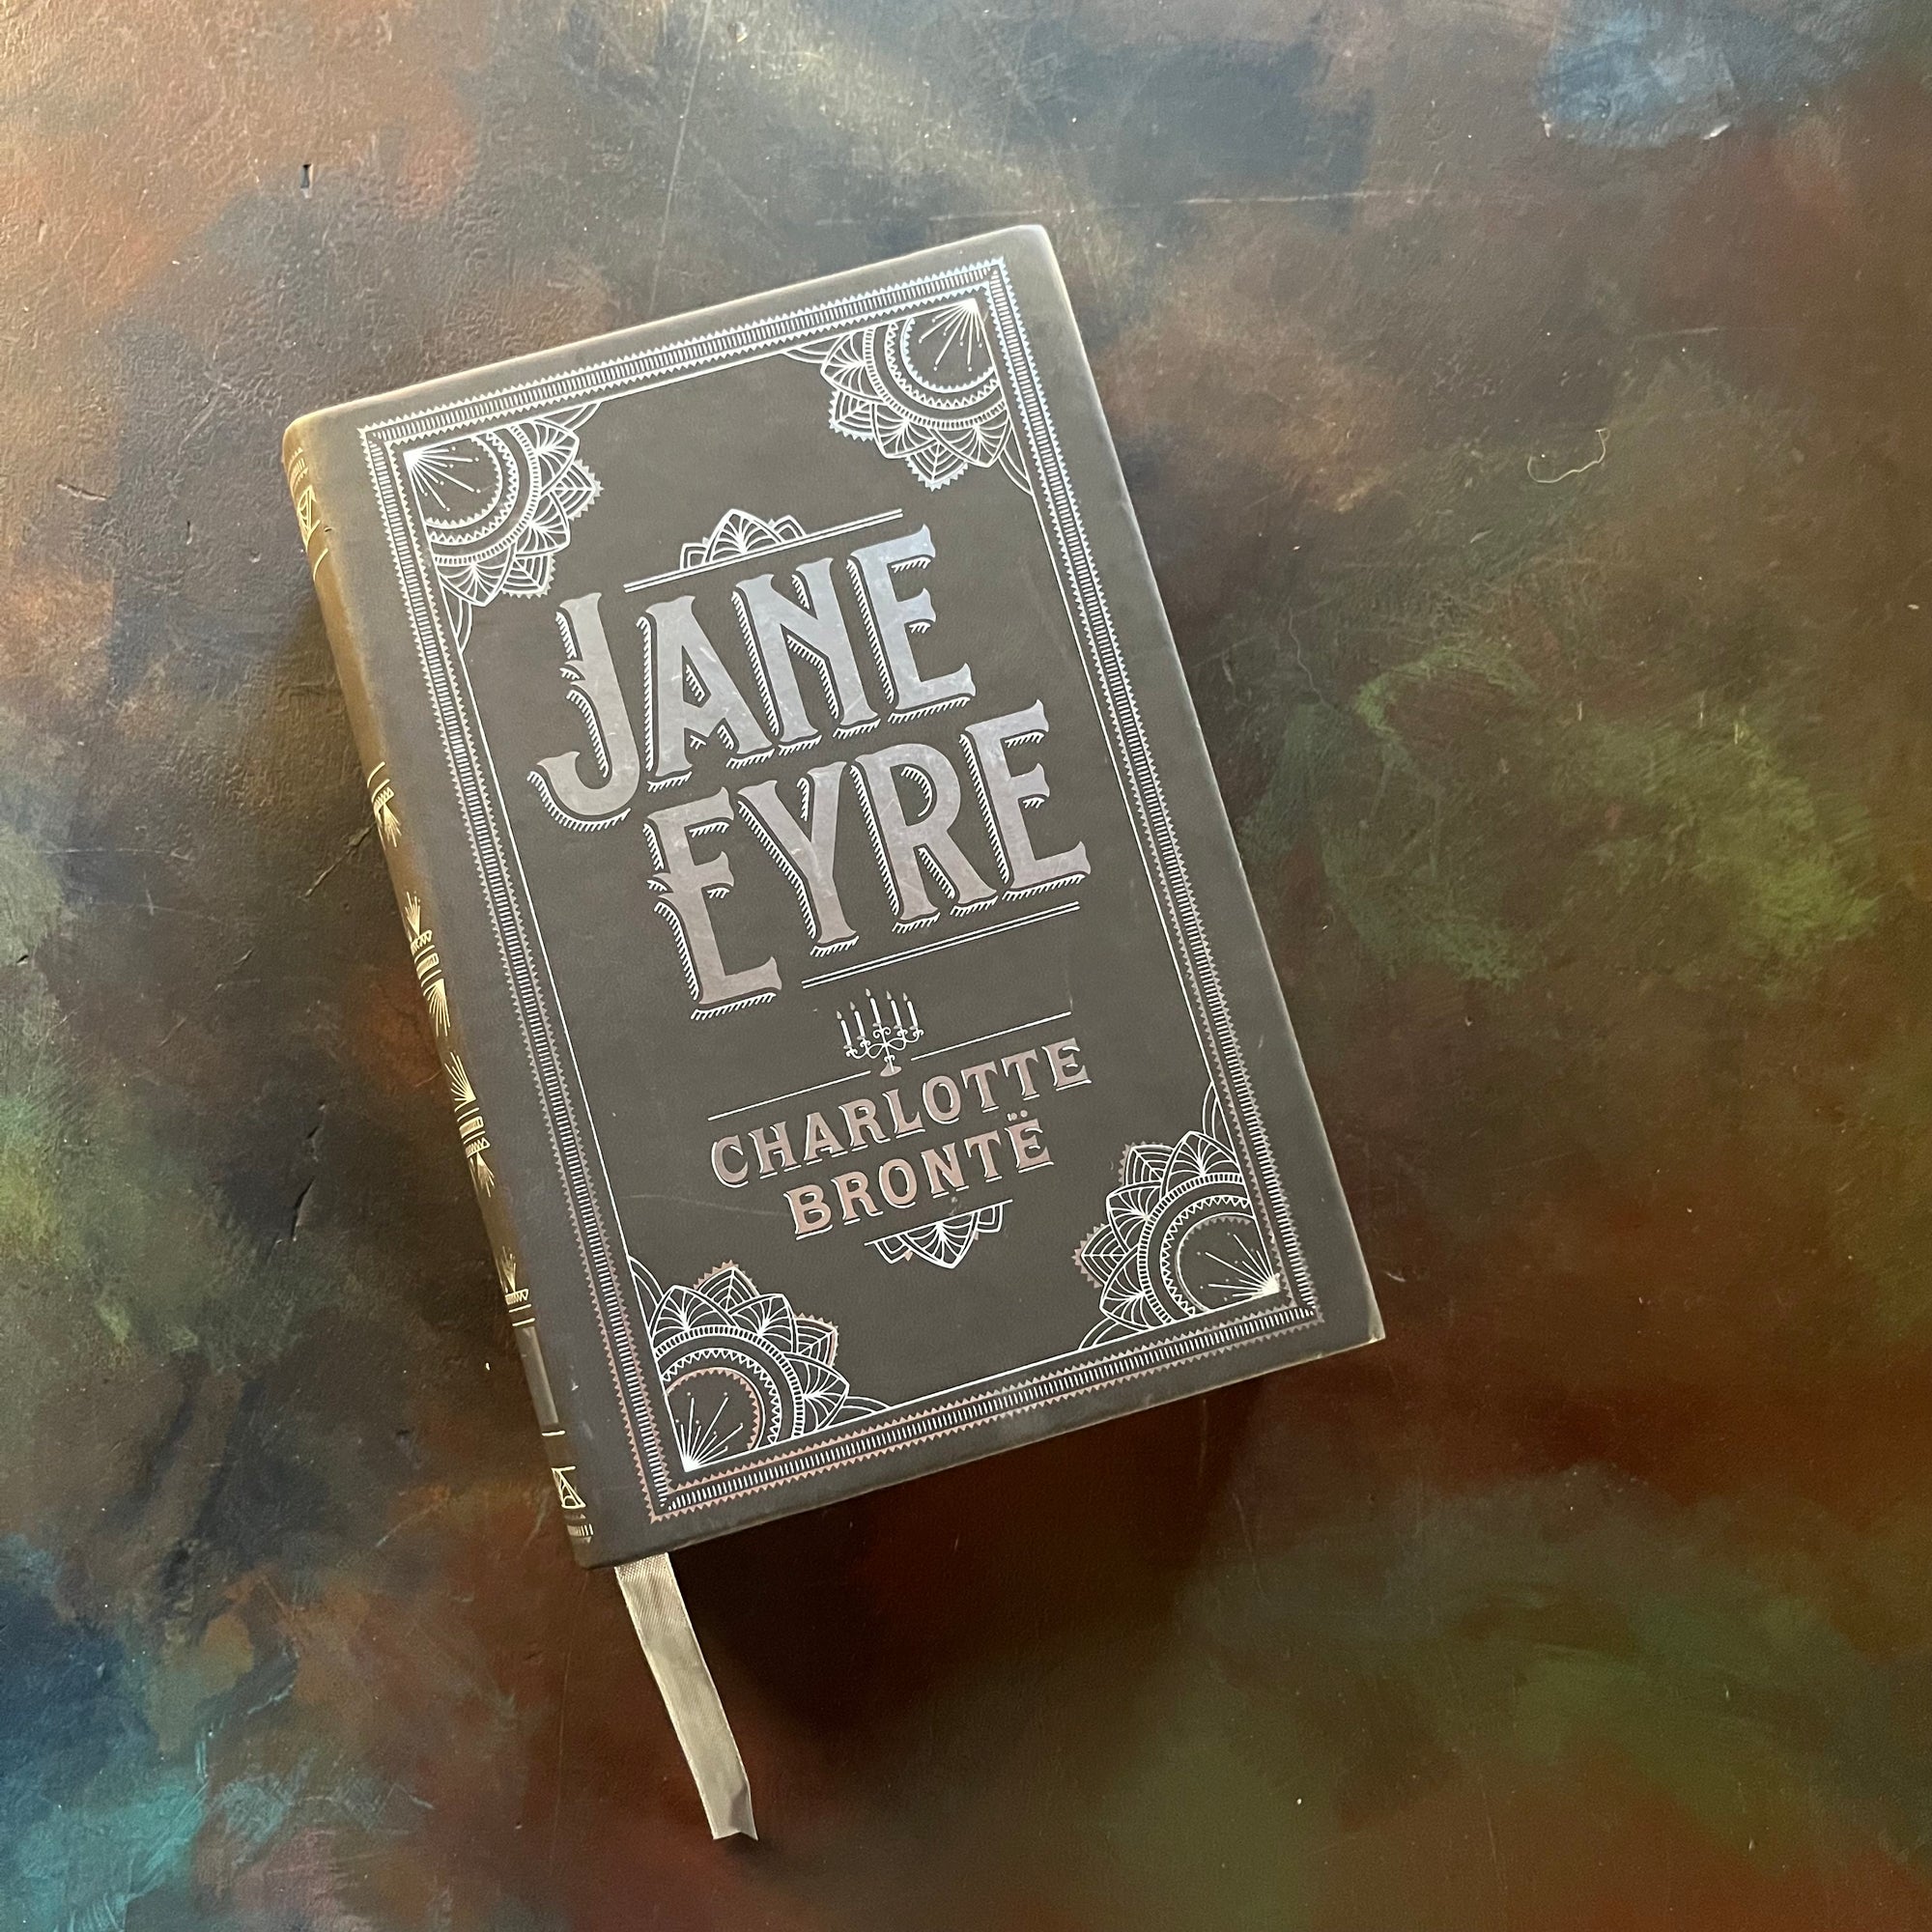 Jane Eyre Written by Charlotte Bront-2016 Barnes & Noble Leatherbound Edition-classic English literature-view of the front cover